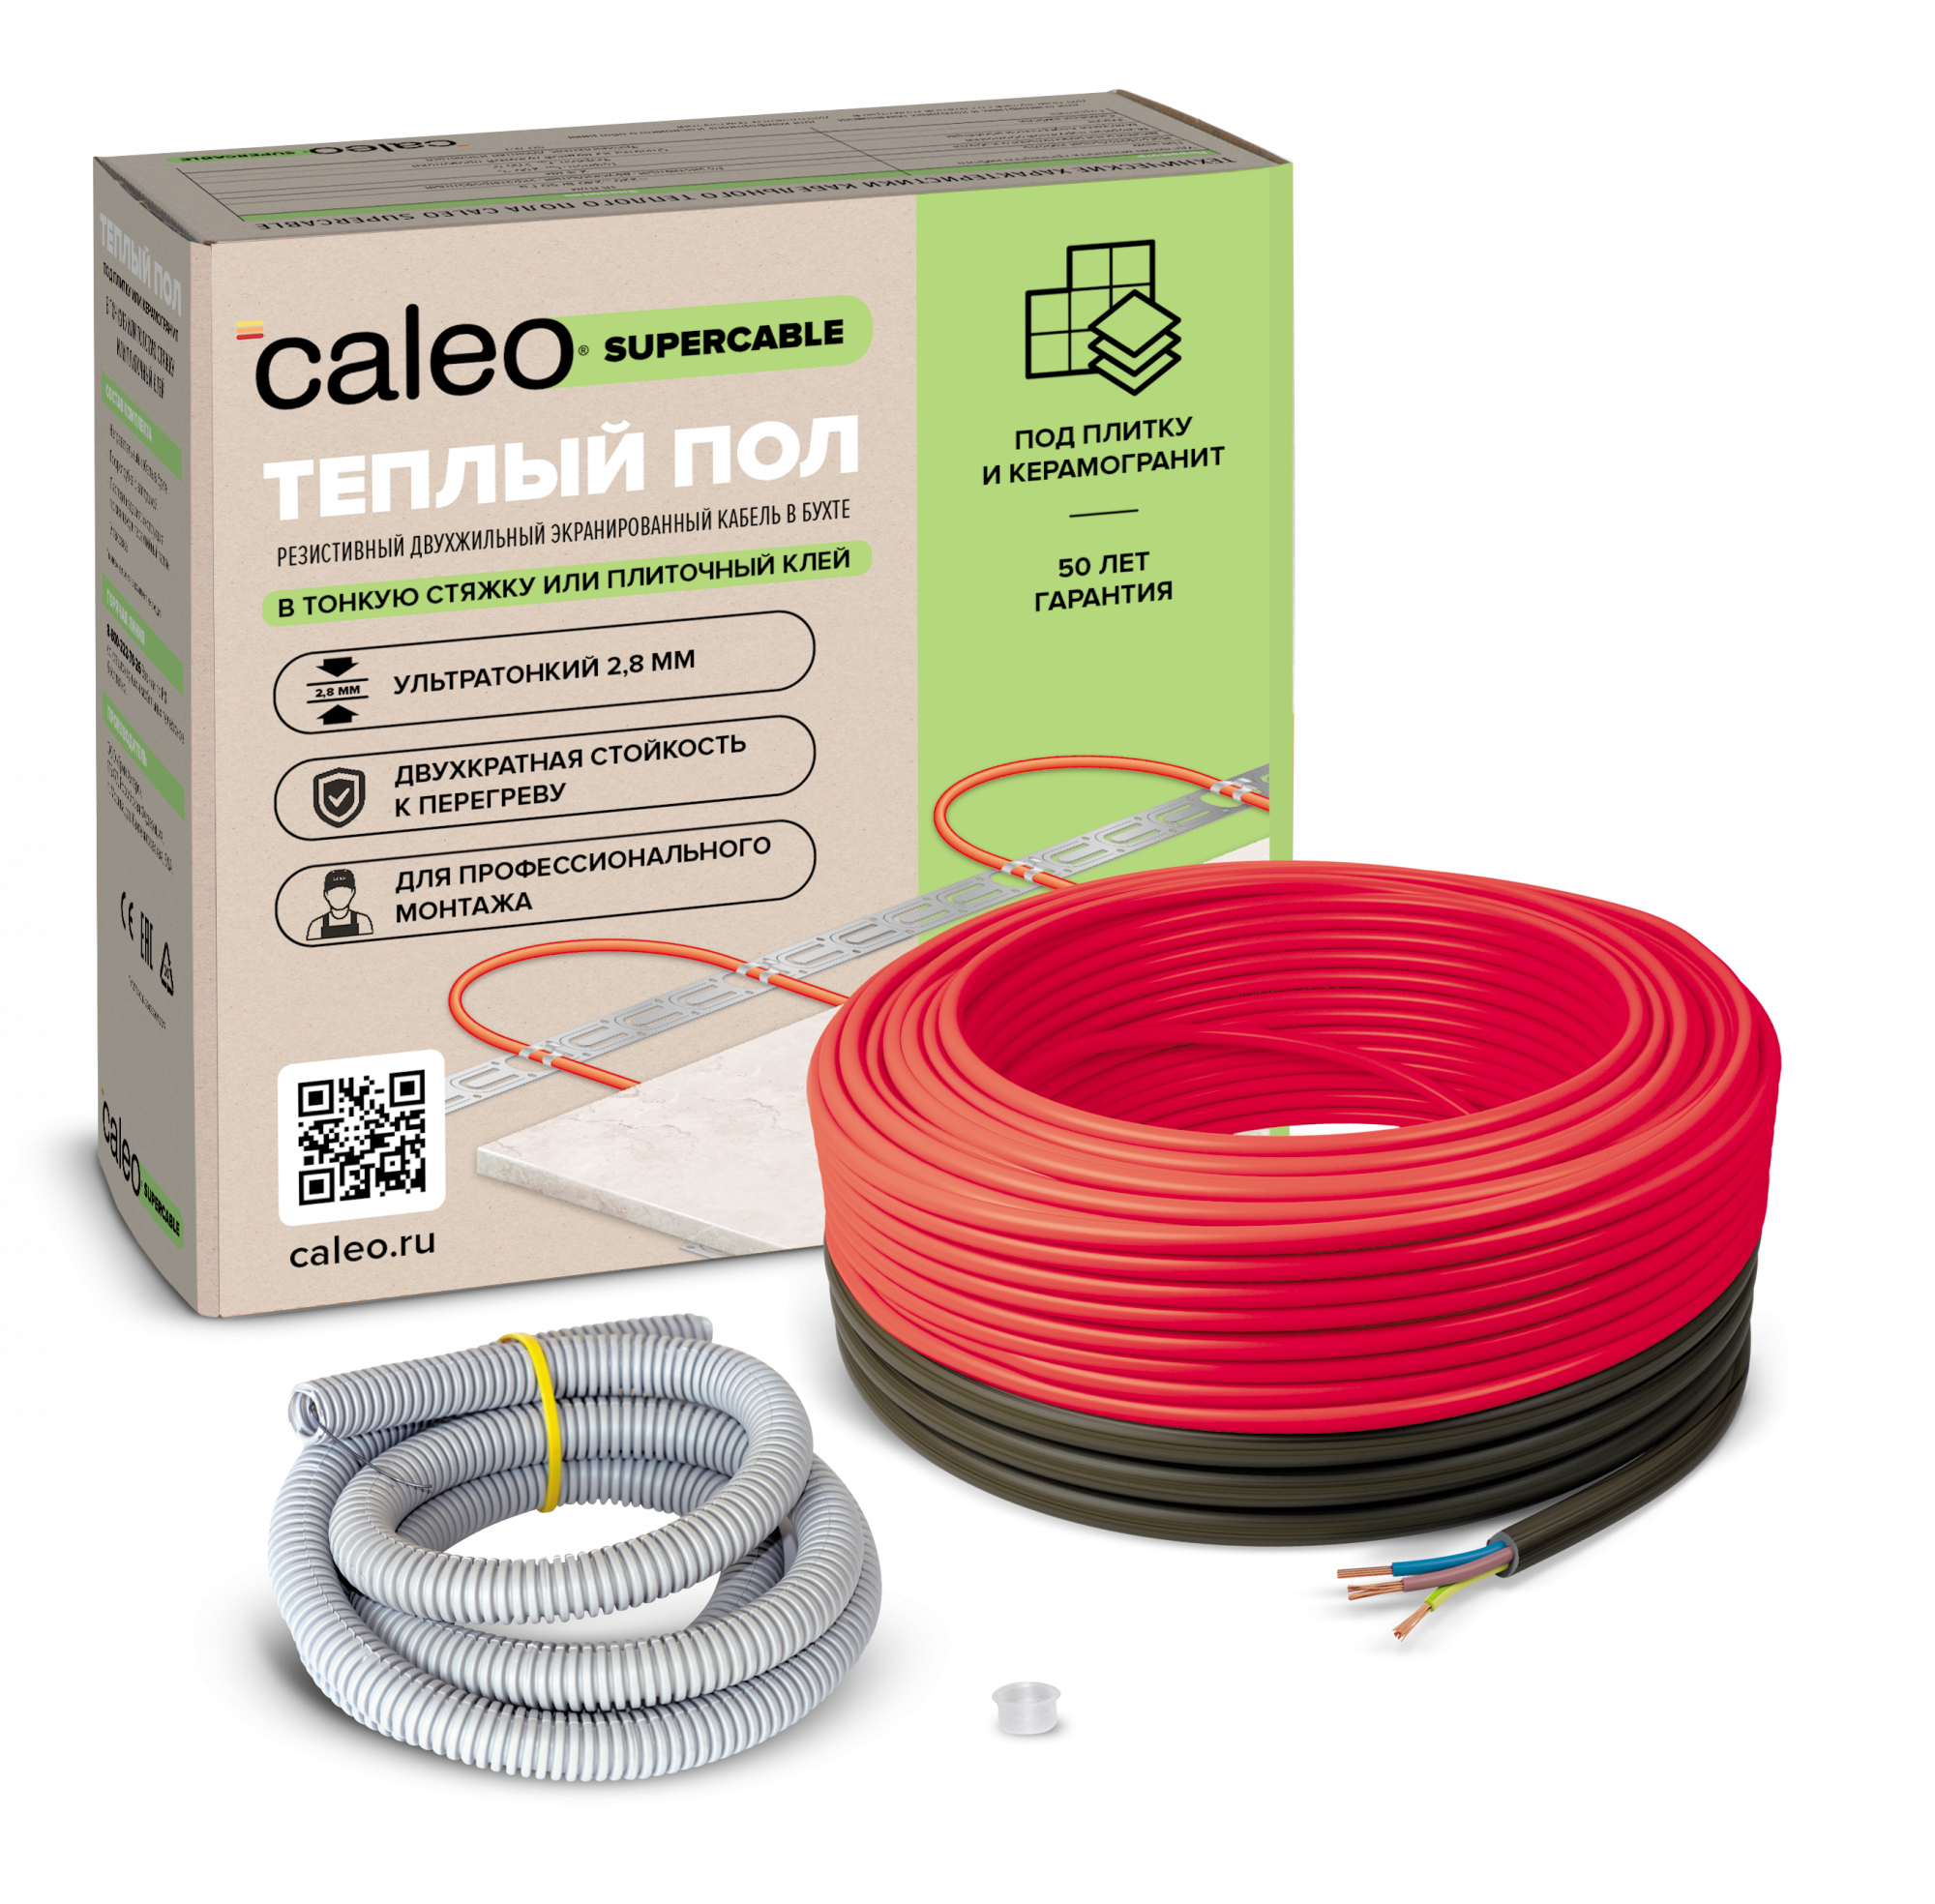 CALEO SUPERCABLE